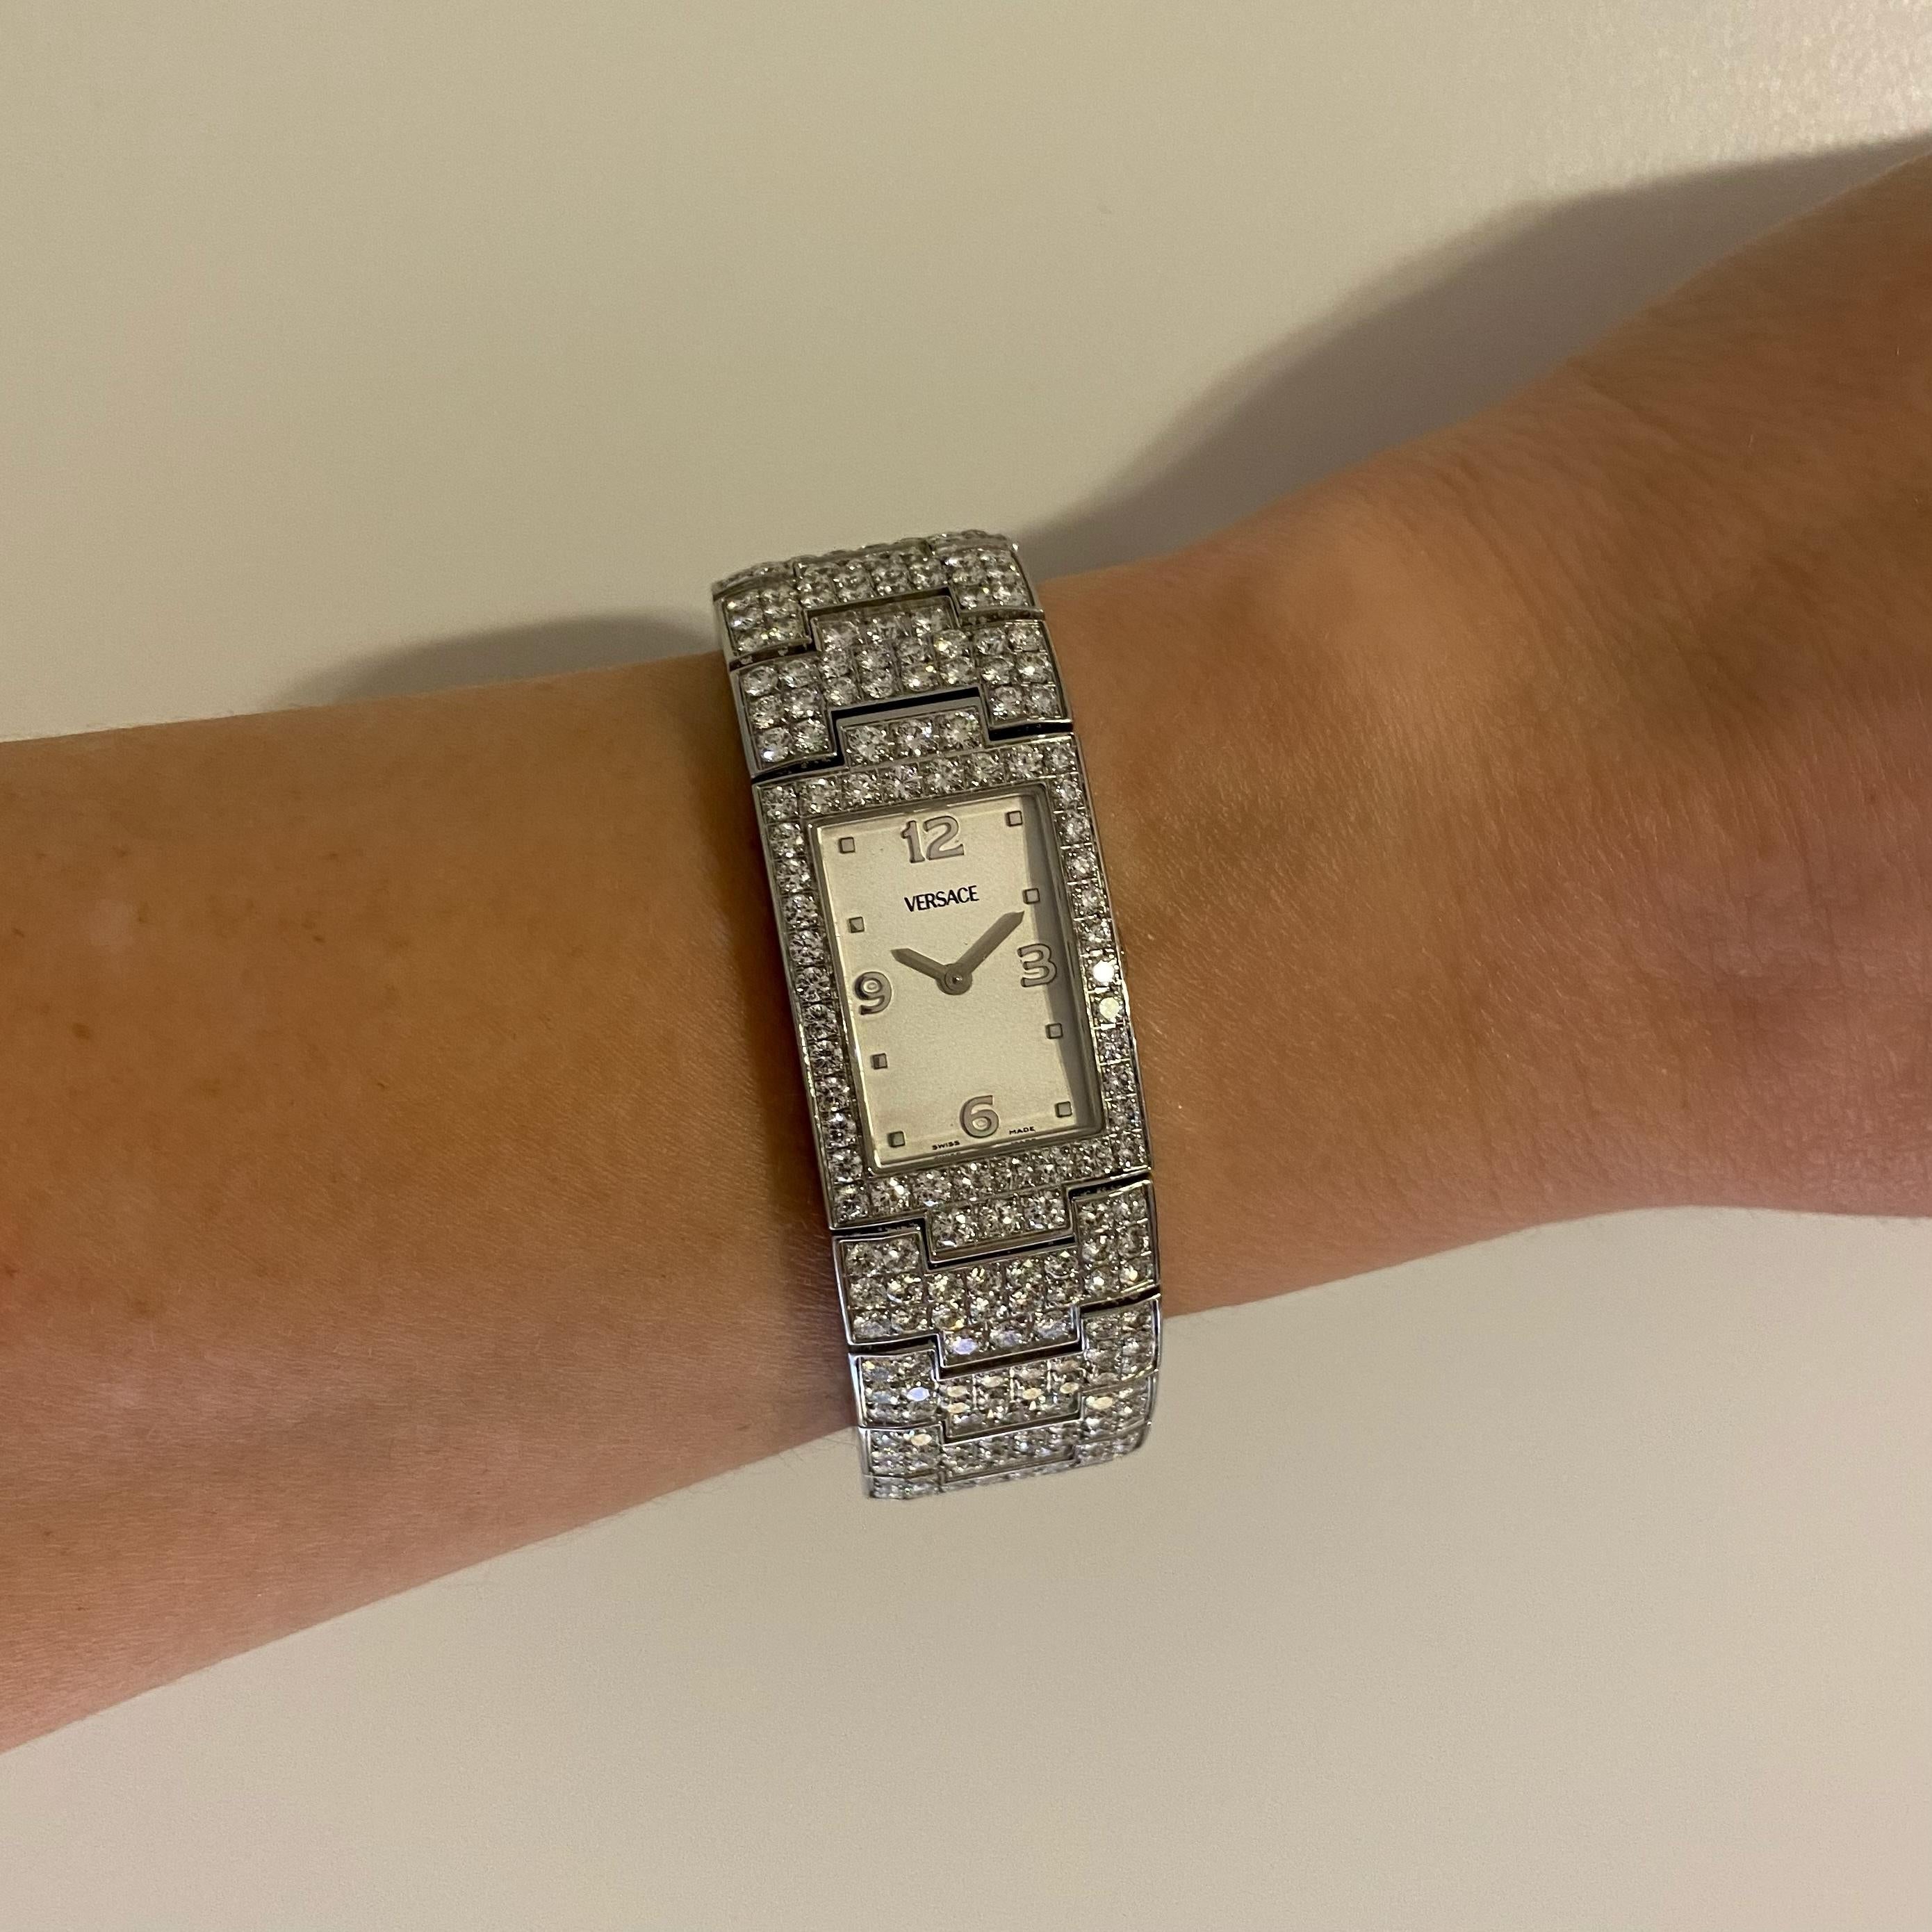 Simply Beautiful! Rare Versace Greca 990139 Stainless Steel Diamond Wrist Watch. Watch and Bracelet Hand set with 446 round Brilliant cut Diamonds, weighing approx. 15.75tcw. Swiss Made, Quartz Movement. 30mm tall x 20mm wide. More Beautiful in real